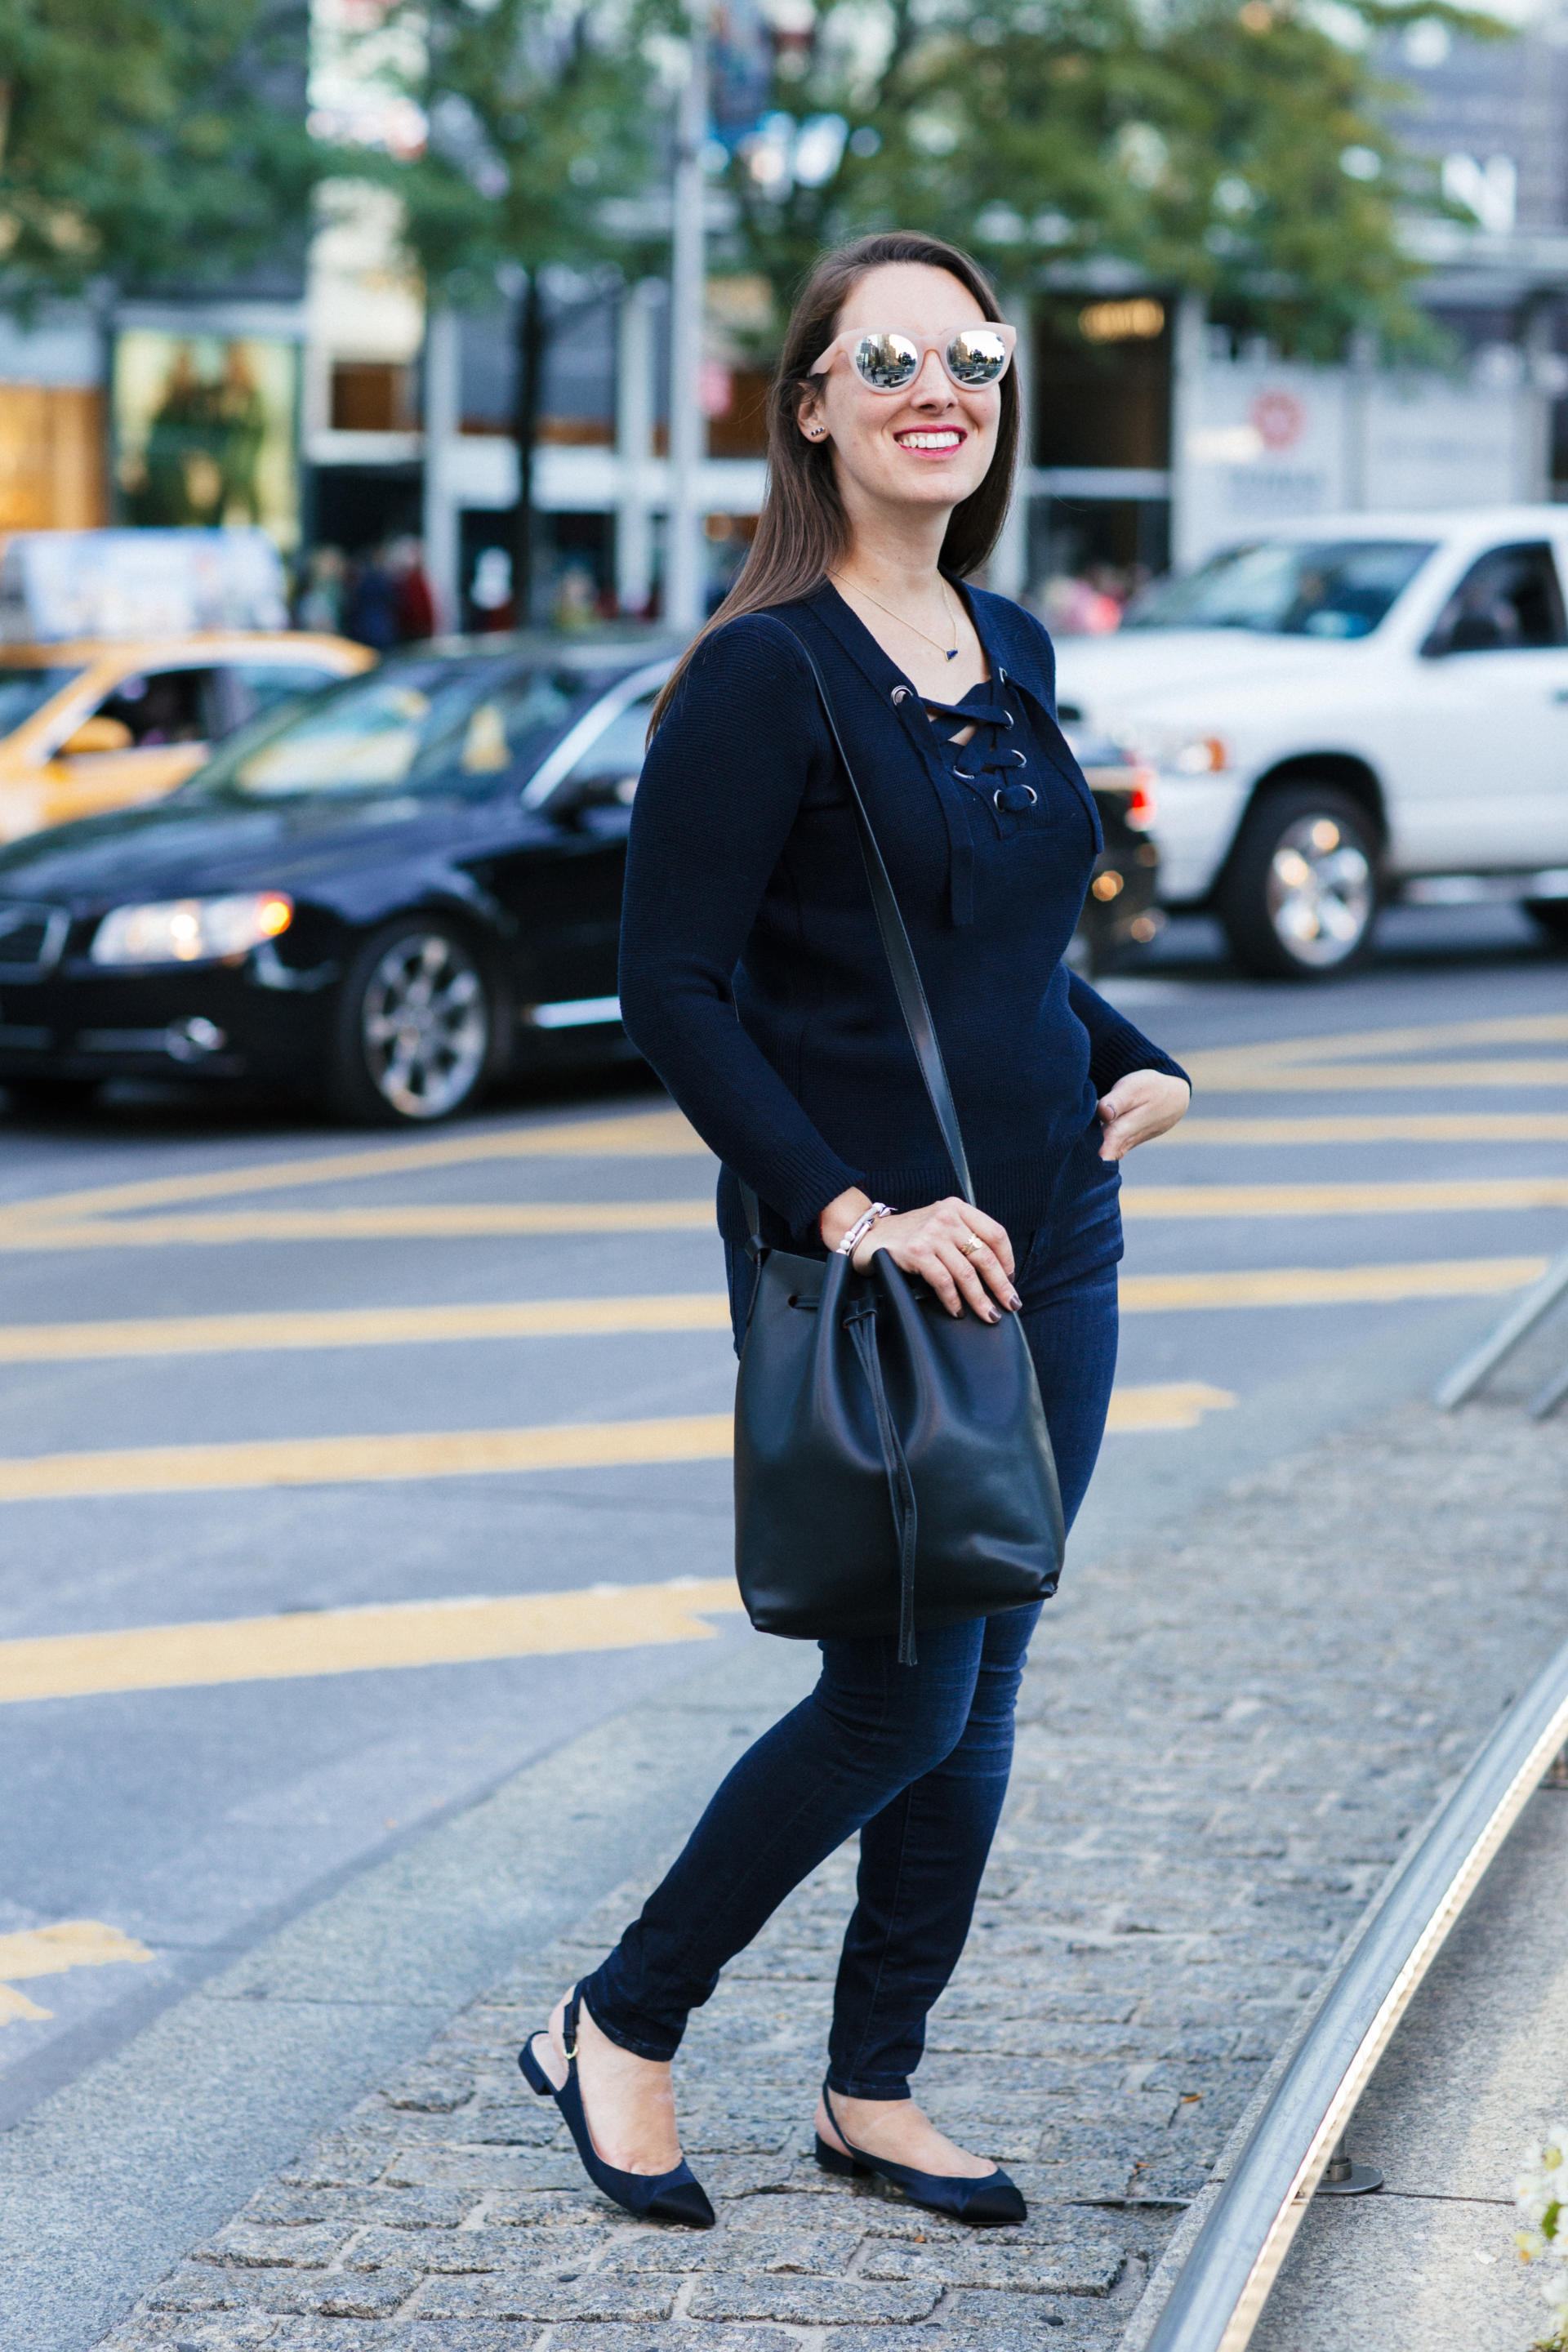 STYLE: Black and Blue with Zaful